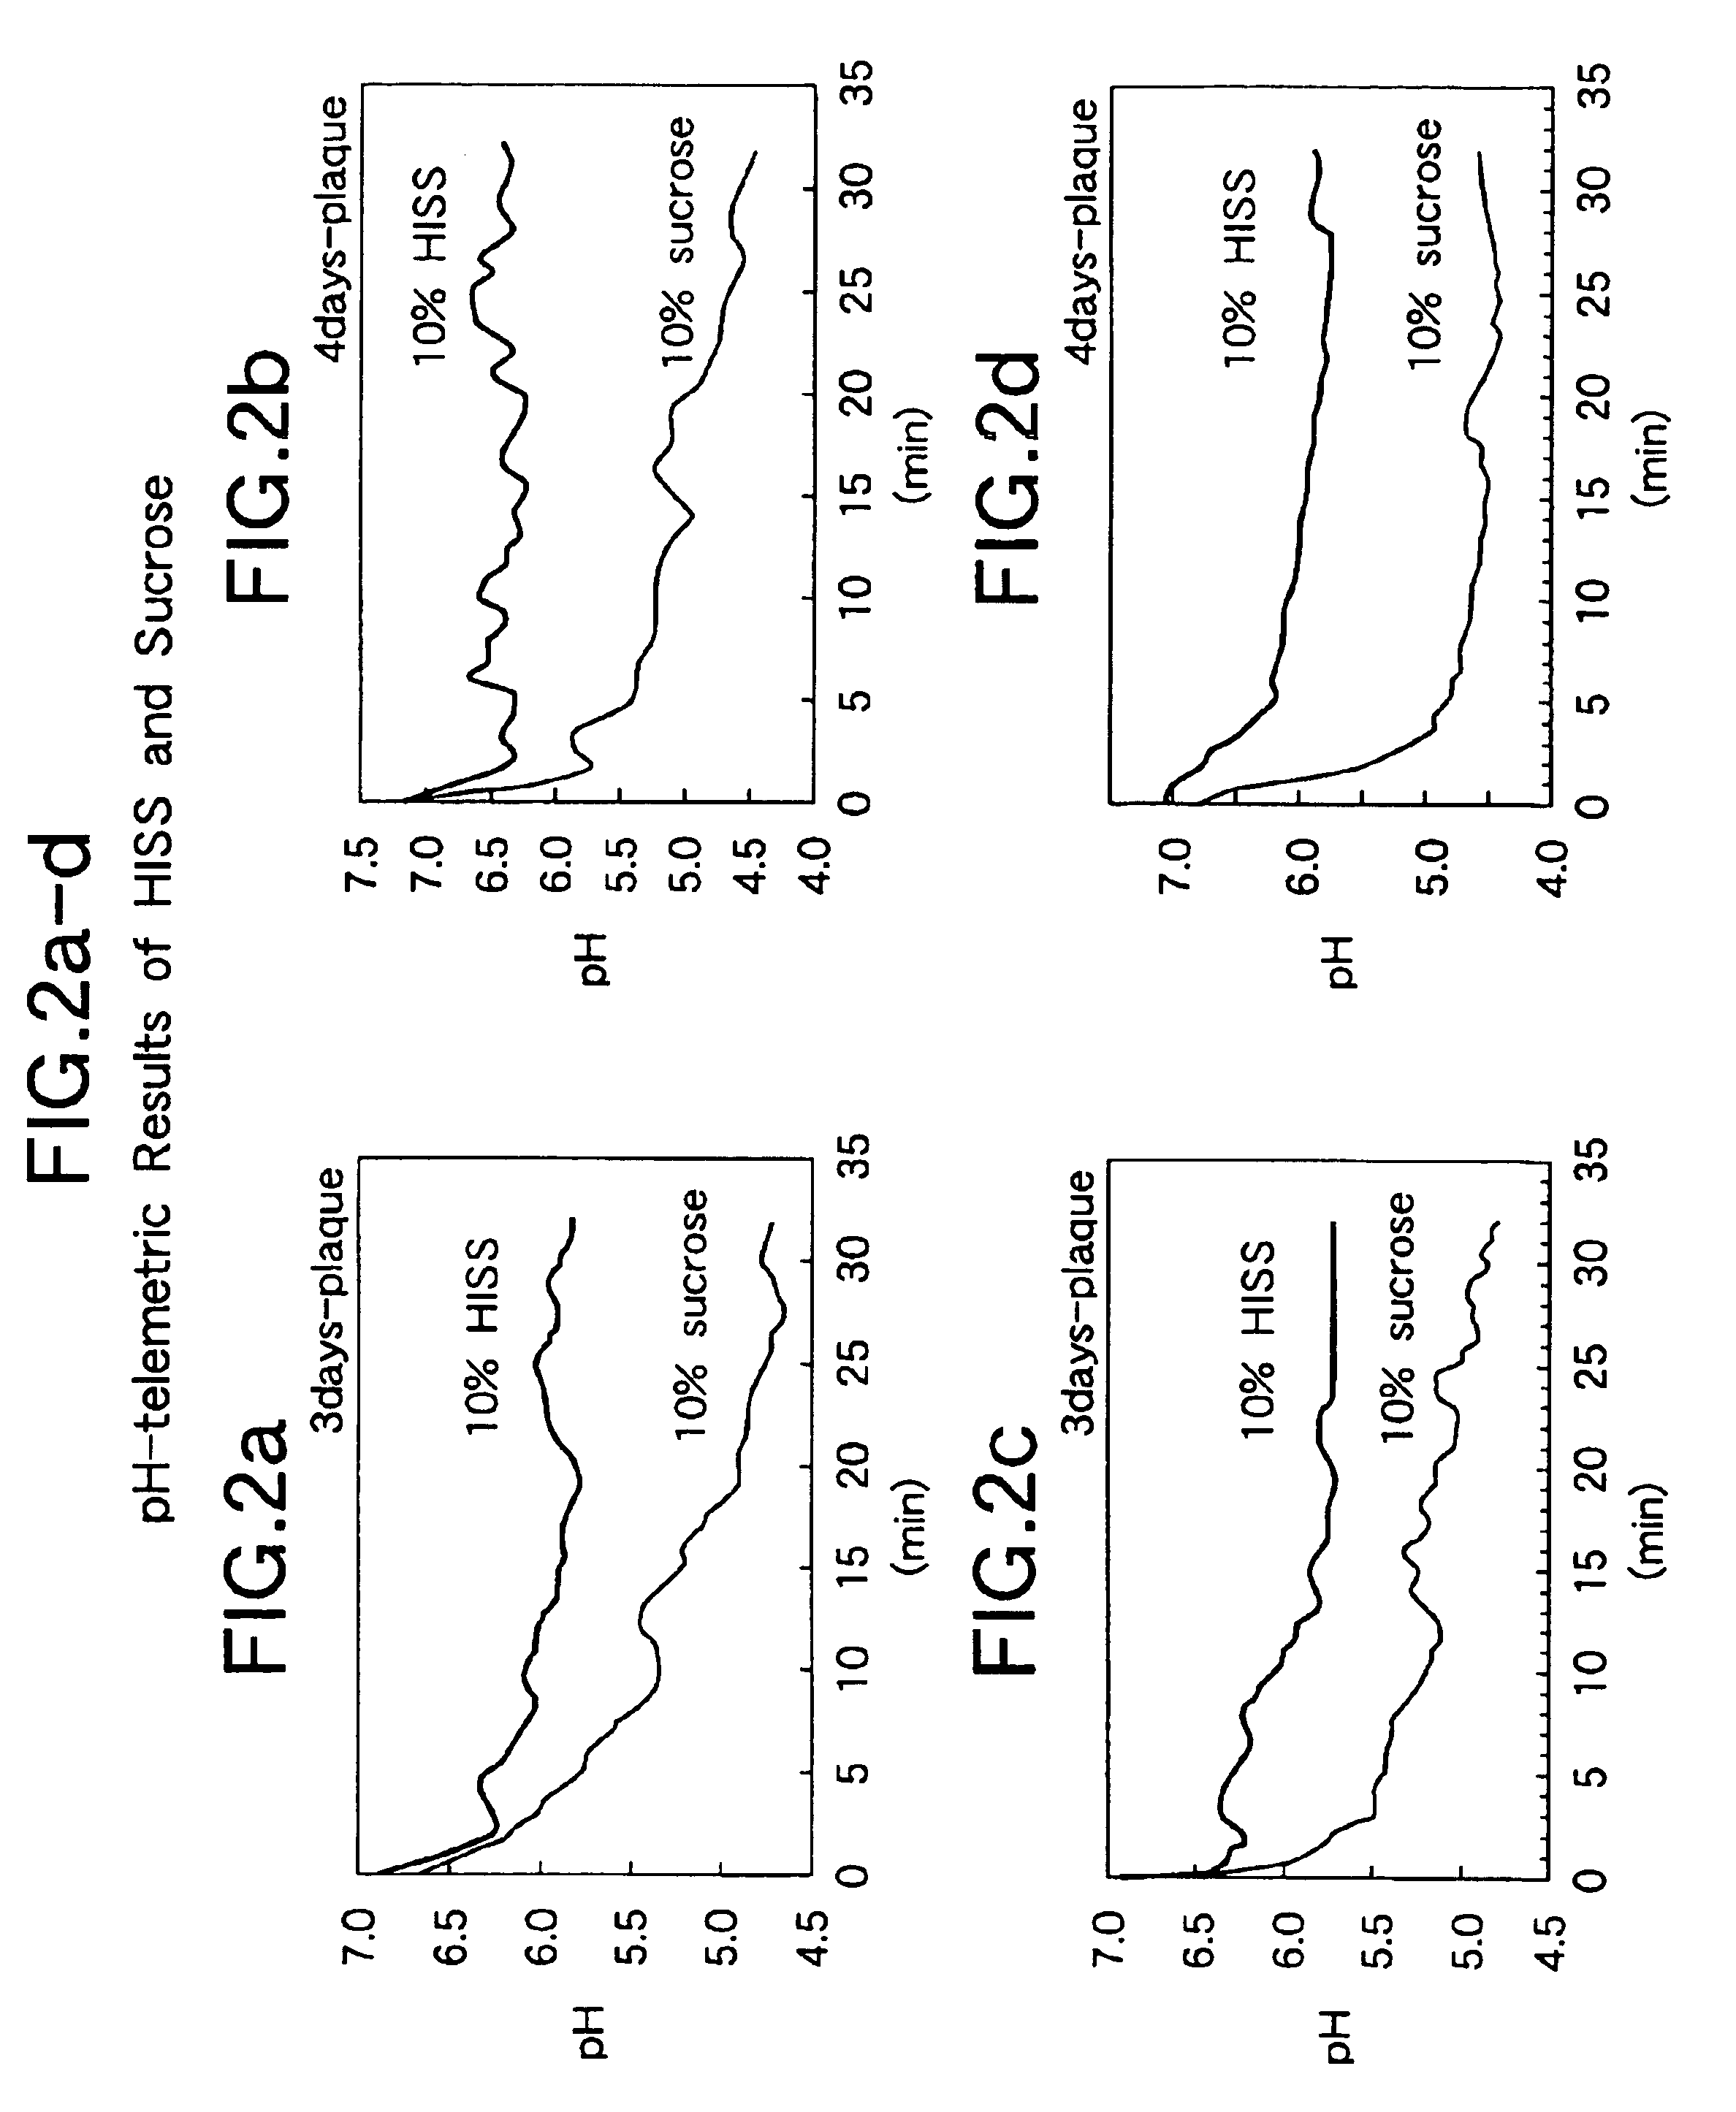 Coated chewing gum products containing hydrogenated indigestible starch syrup as a binding agent